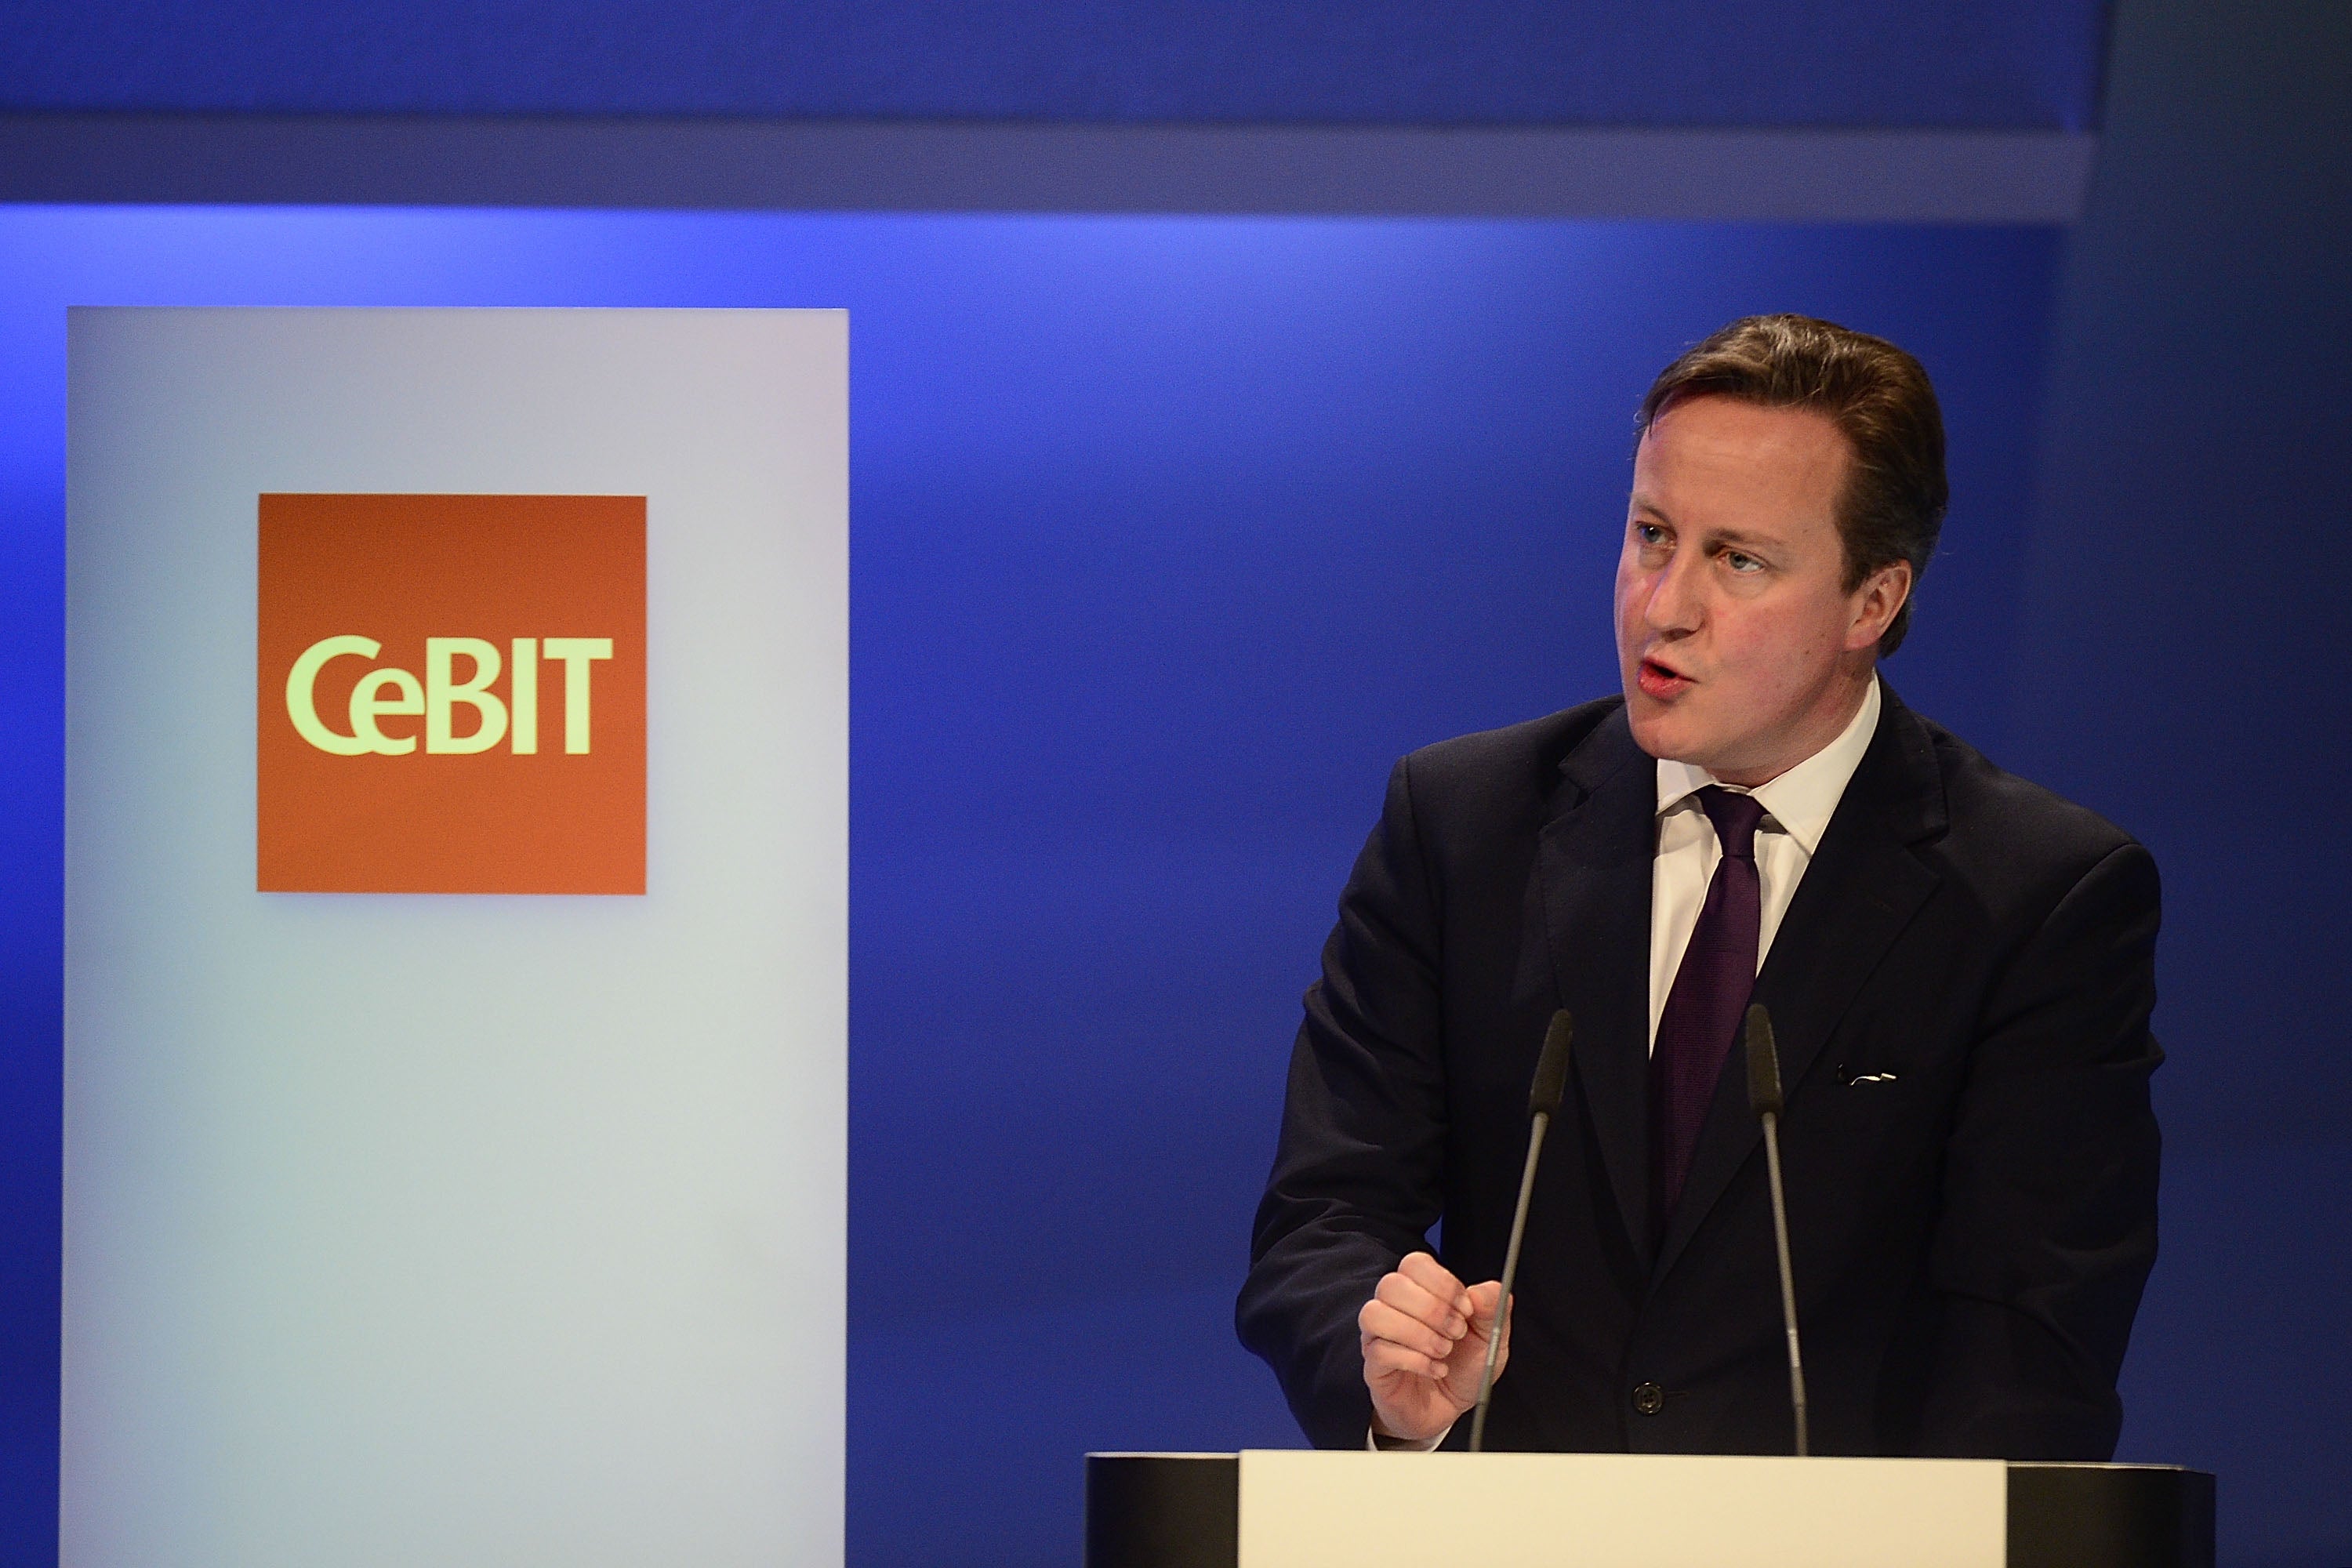 British Prime Minister David Cameron delivers a speech during the opening evening of the 2014 CeBIT technology Trade fair on March 9, 2014 in Hanover, Germany. CeBIT is the world's largest technology fair and this year's partner nation is Great Britain.